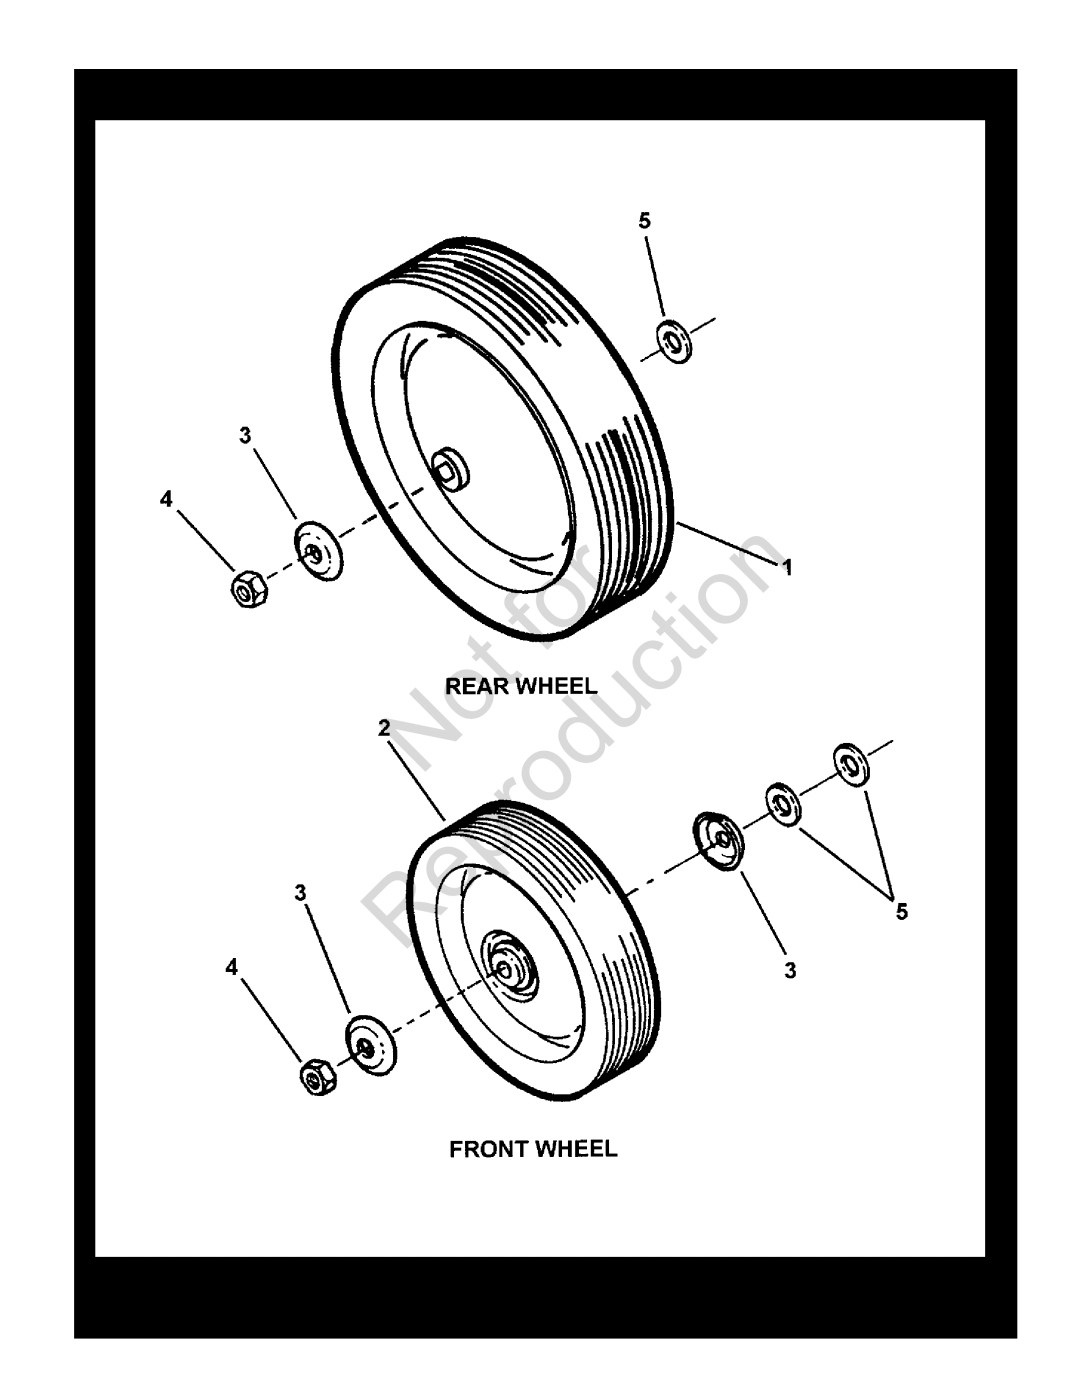 Snapper CP215519HV Wheels, Front & Rear, Reproduction, Manual No, 7006155, Steel Deck Walk Behind, TP 400-5189-A-WB-N 